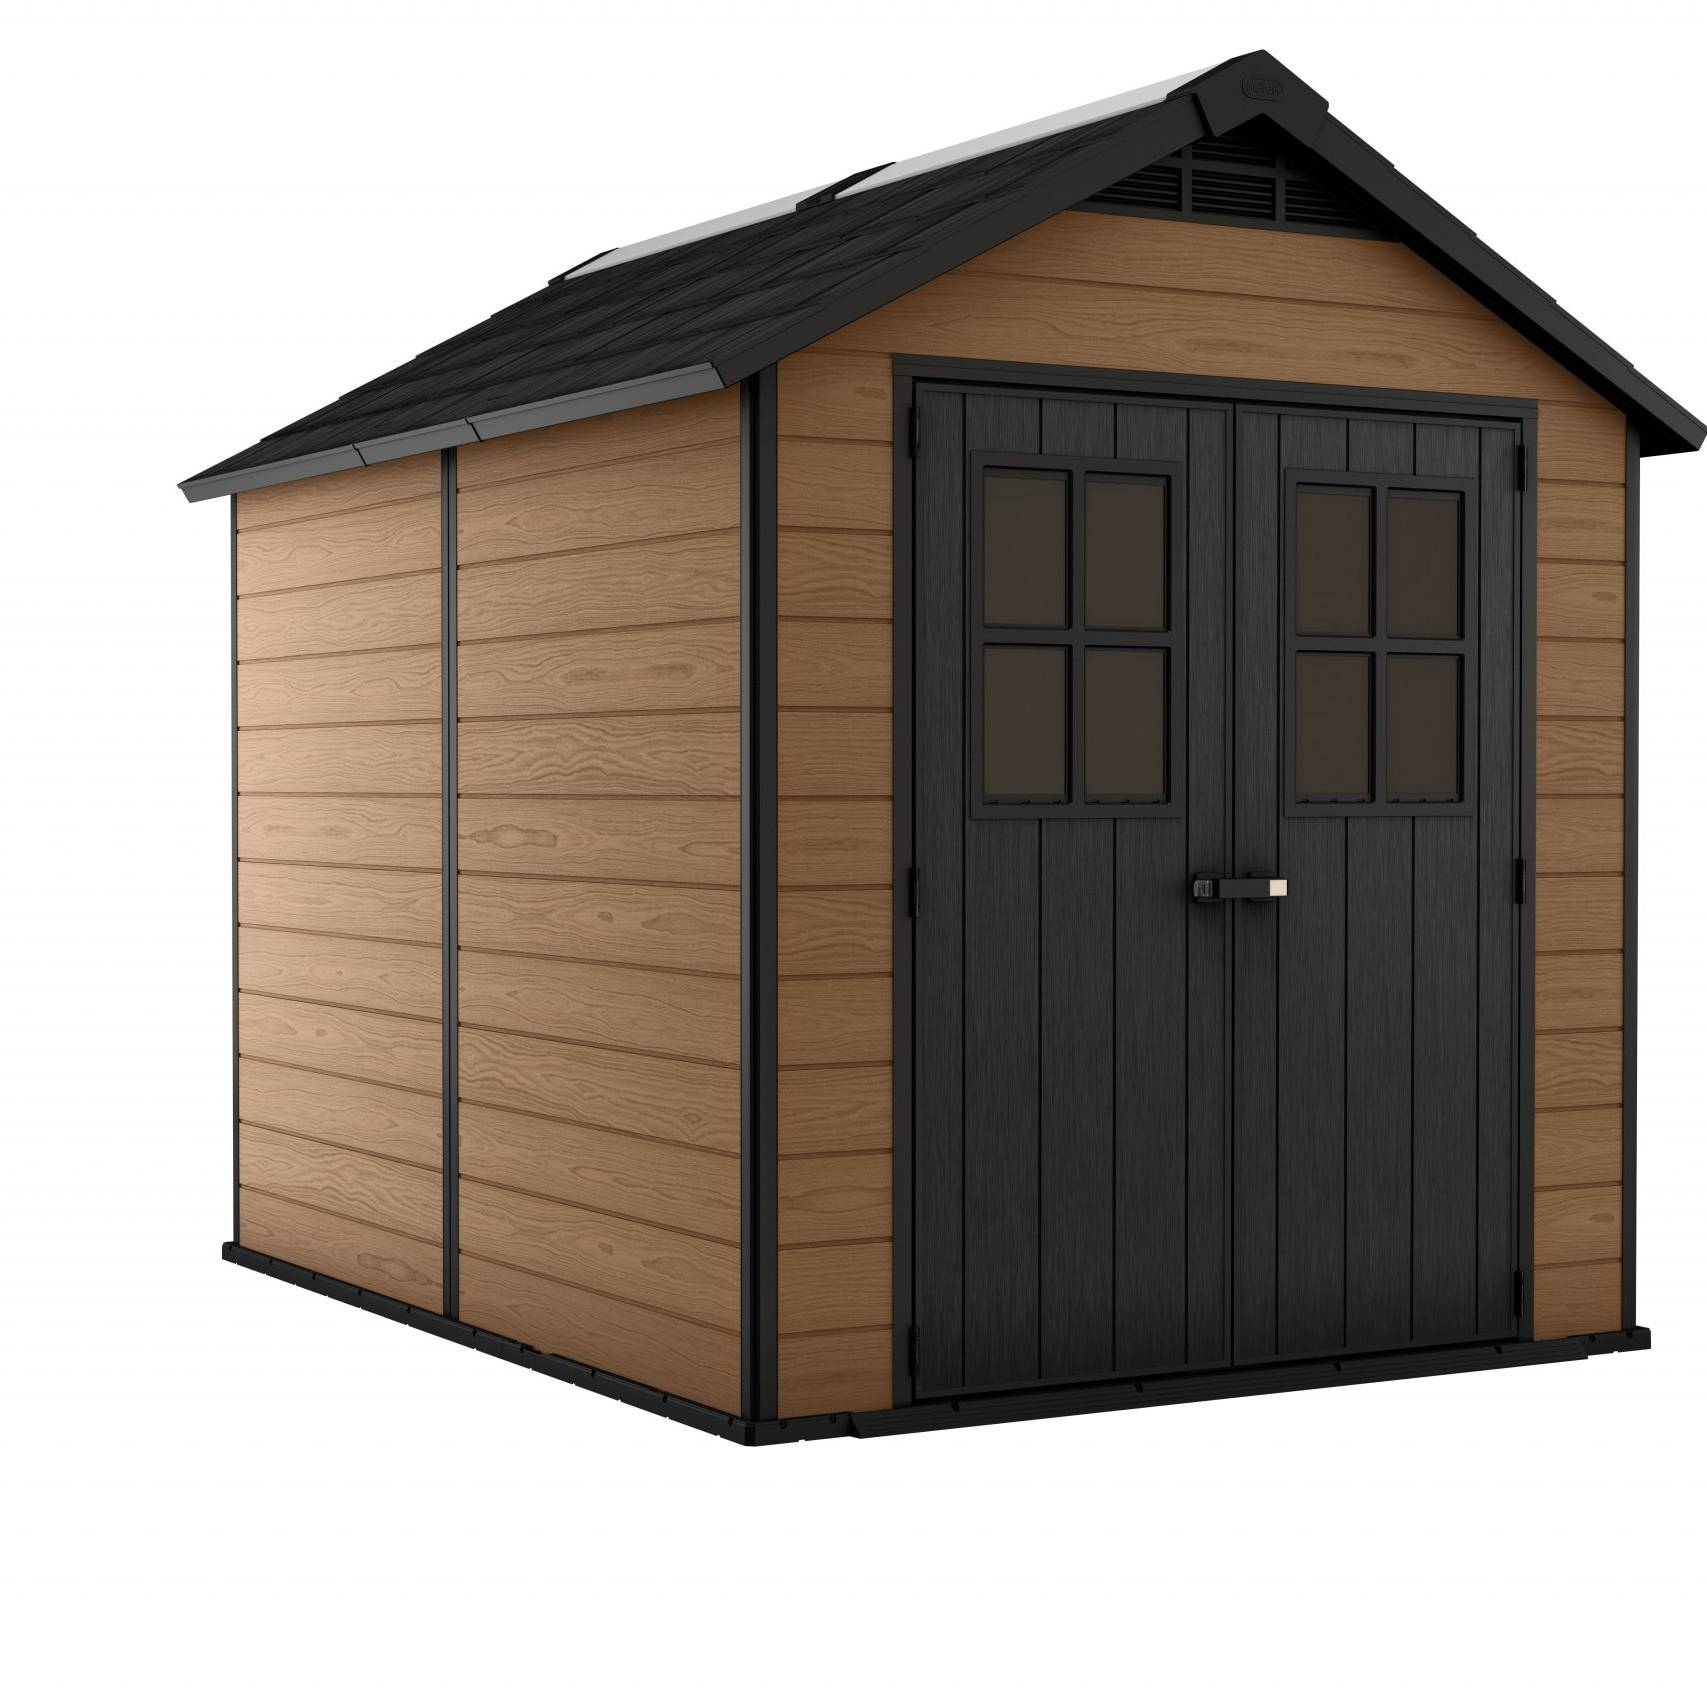 Keter Newton 759 Shed - Brown